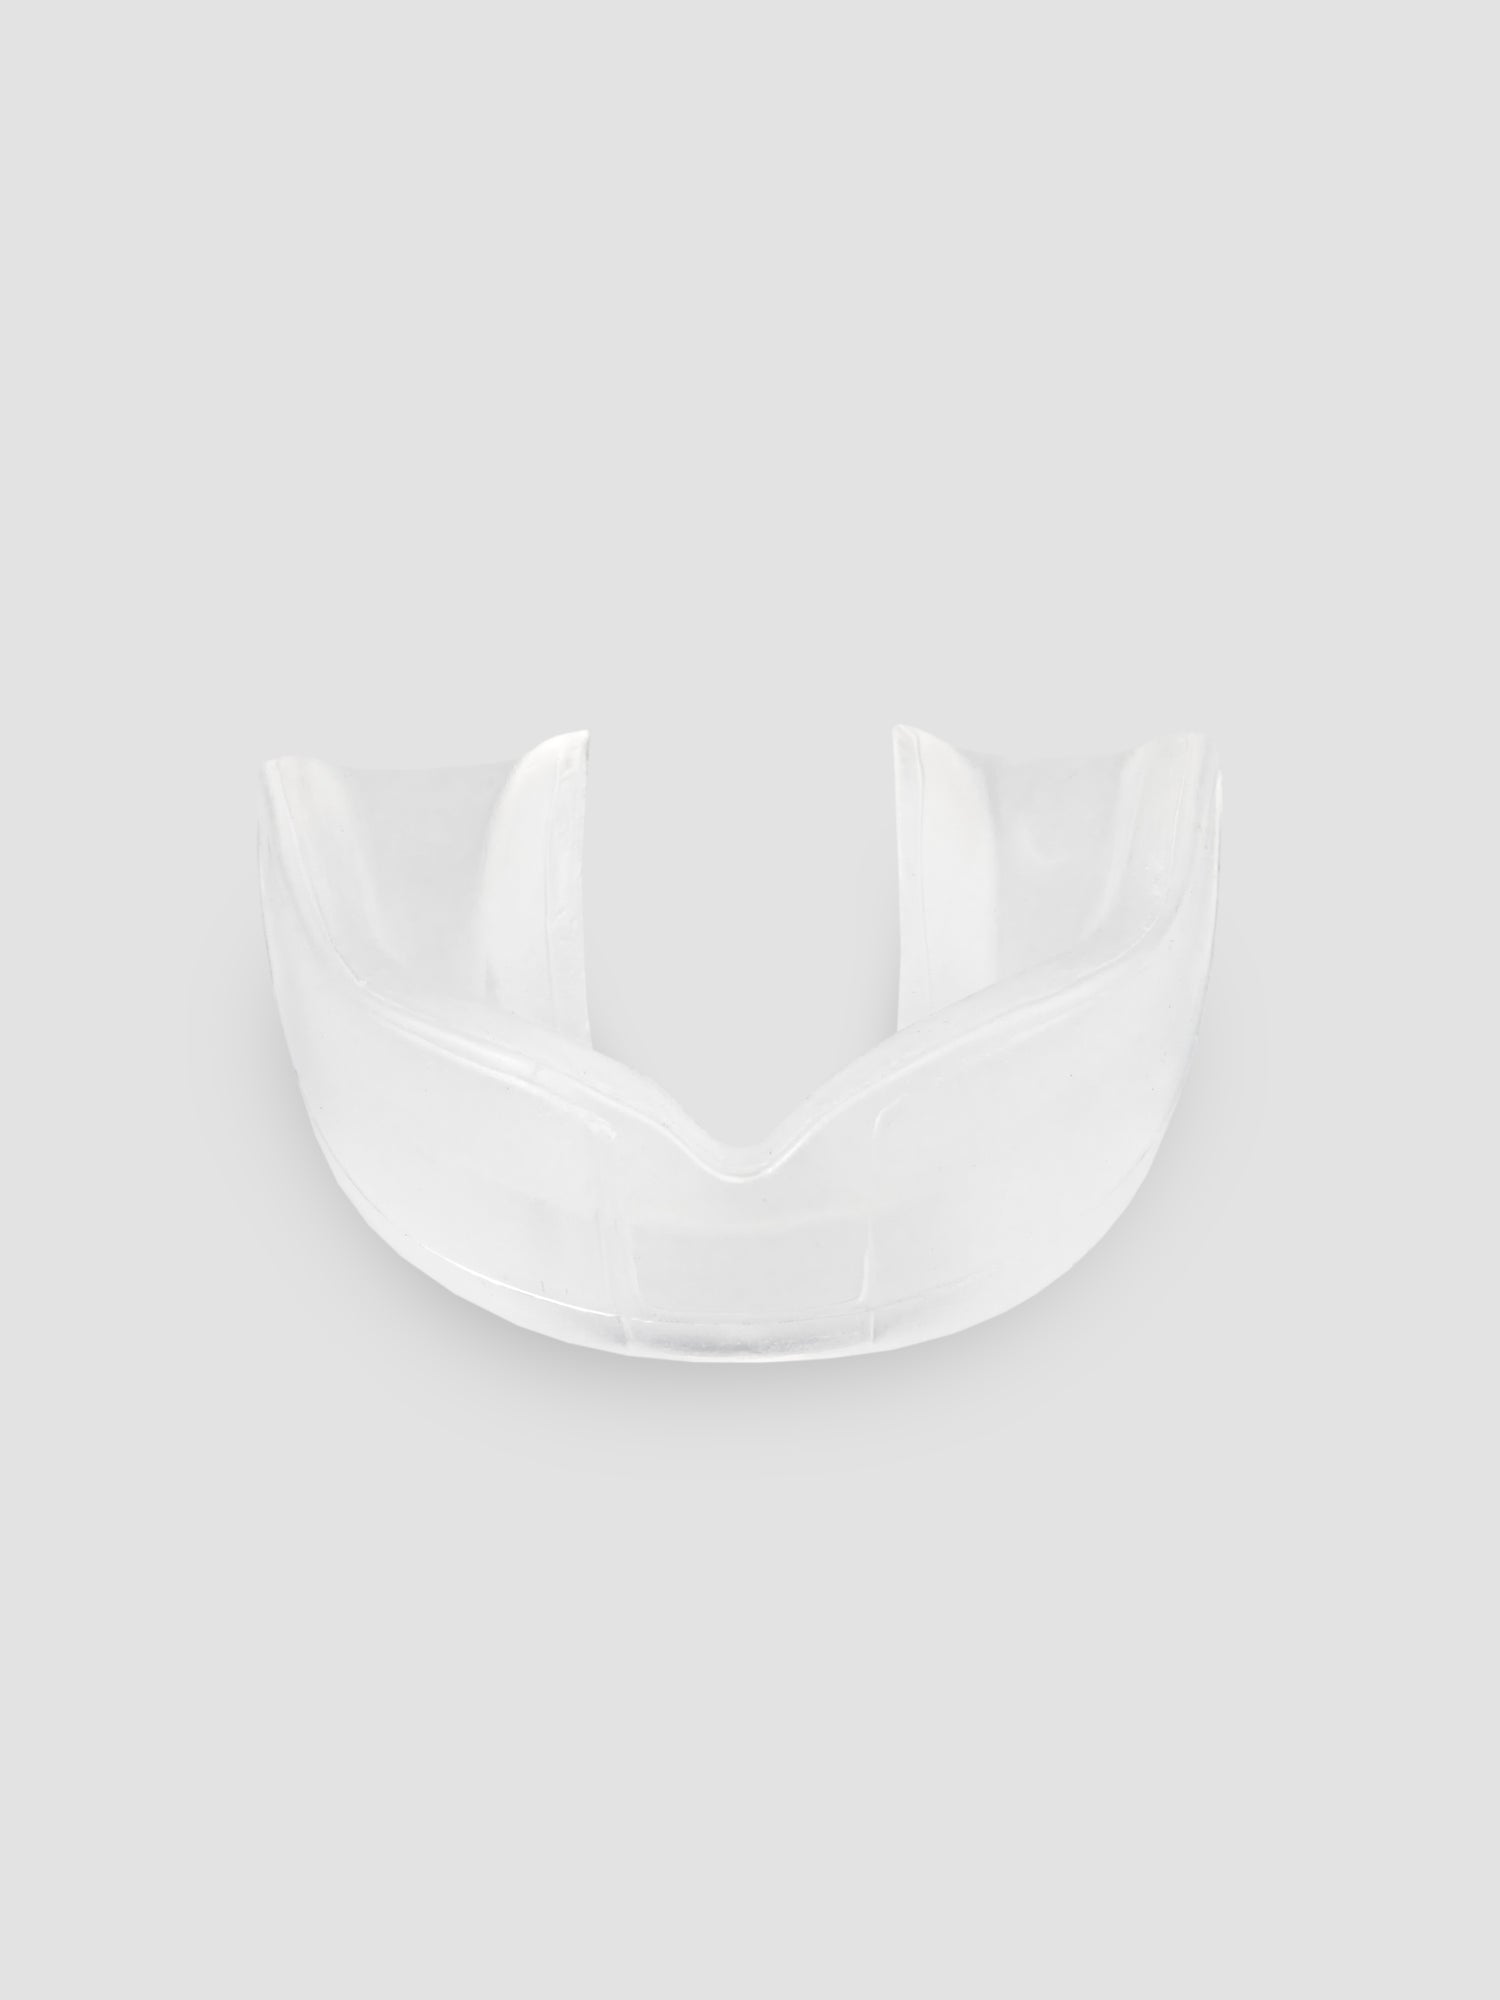 Mouth Guard with Case